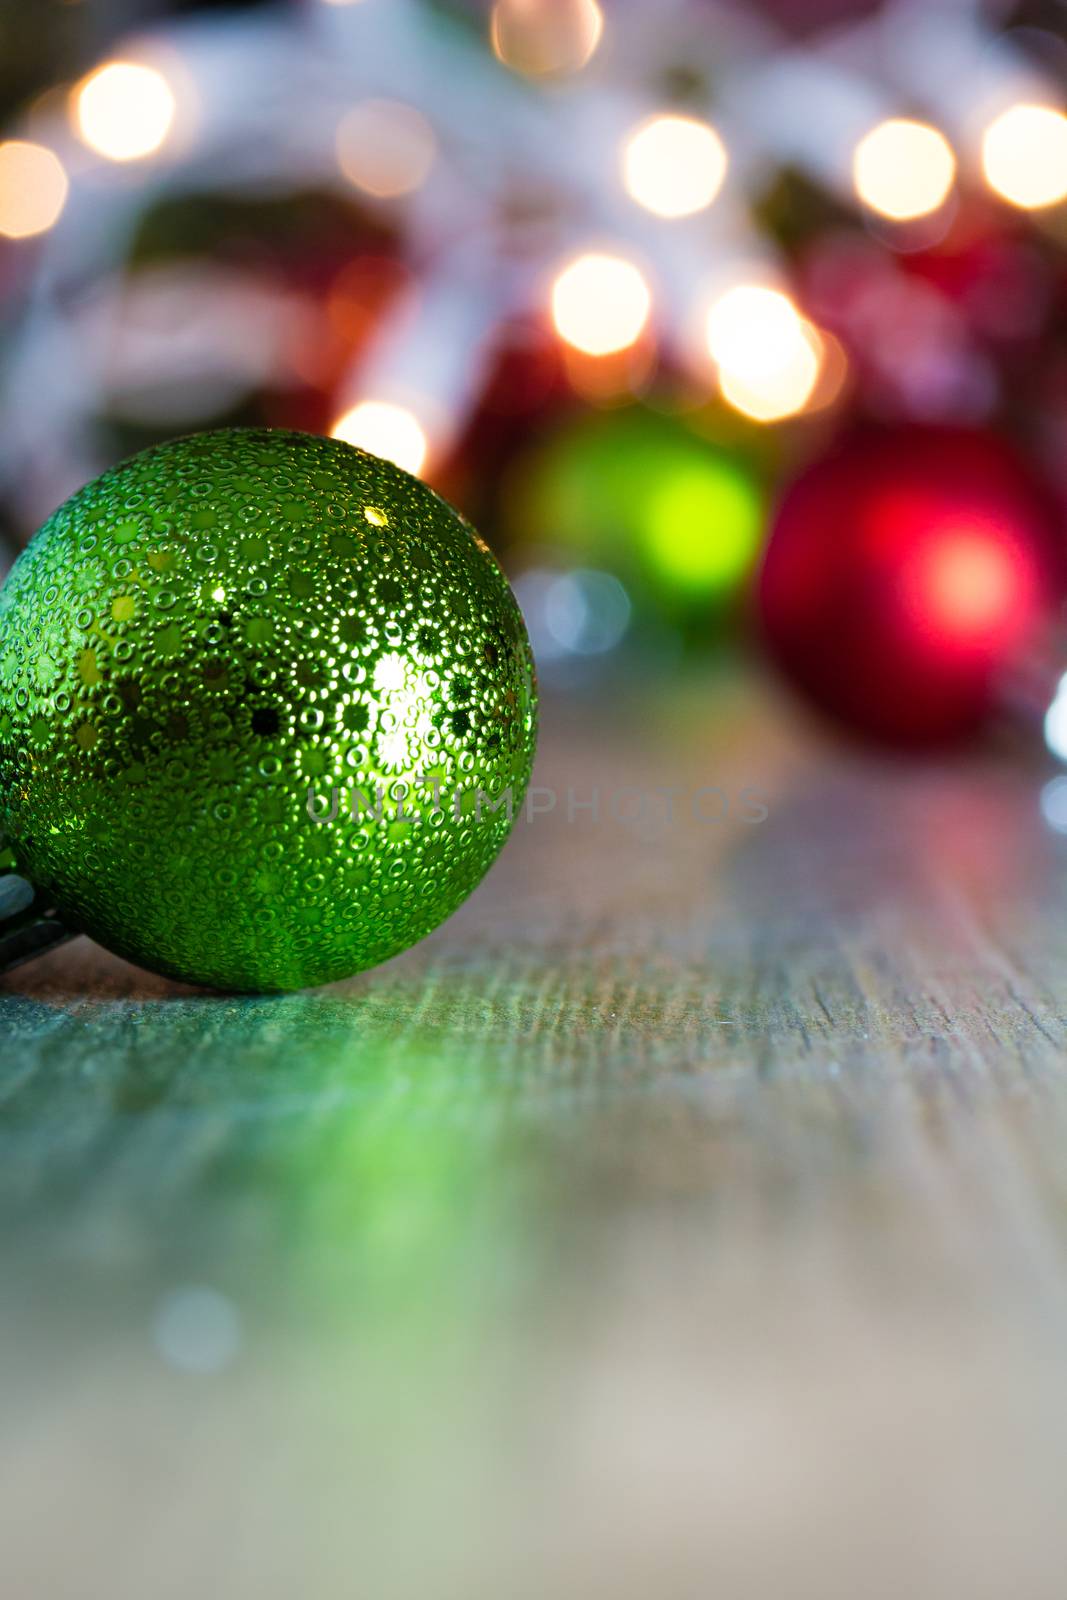 Colorful Christmas ornaments and lights on a wooden background.